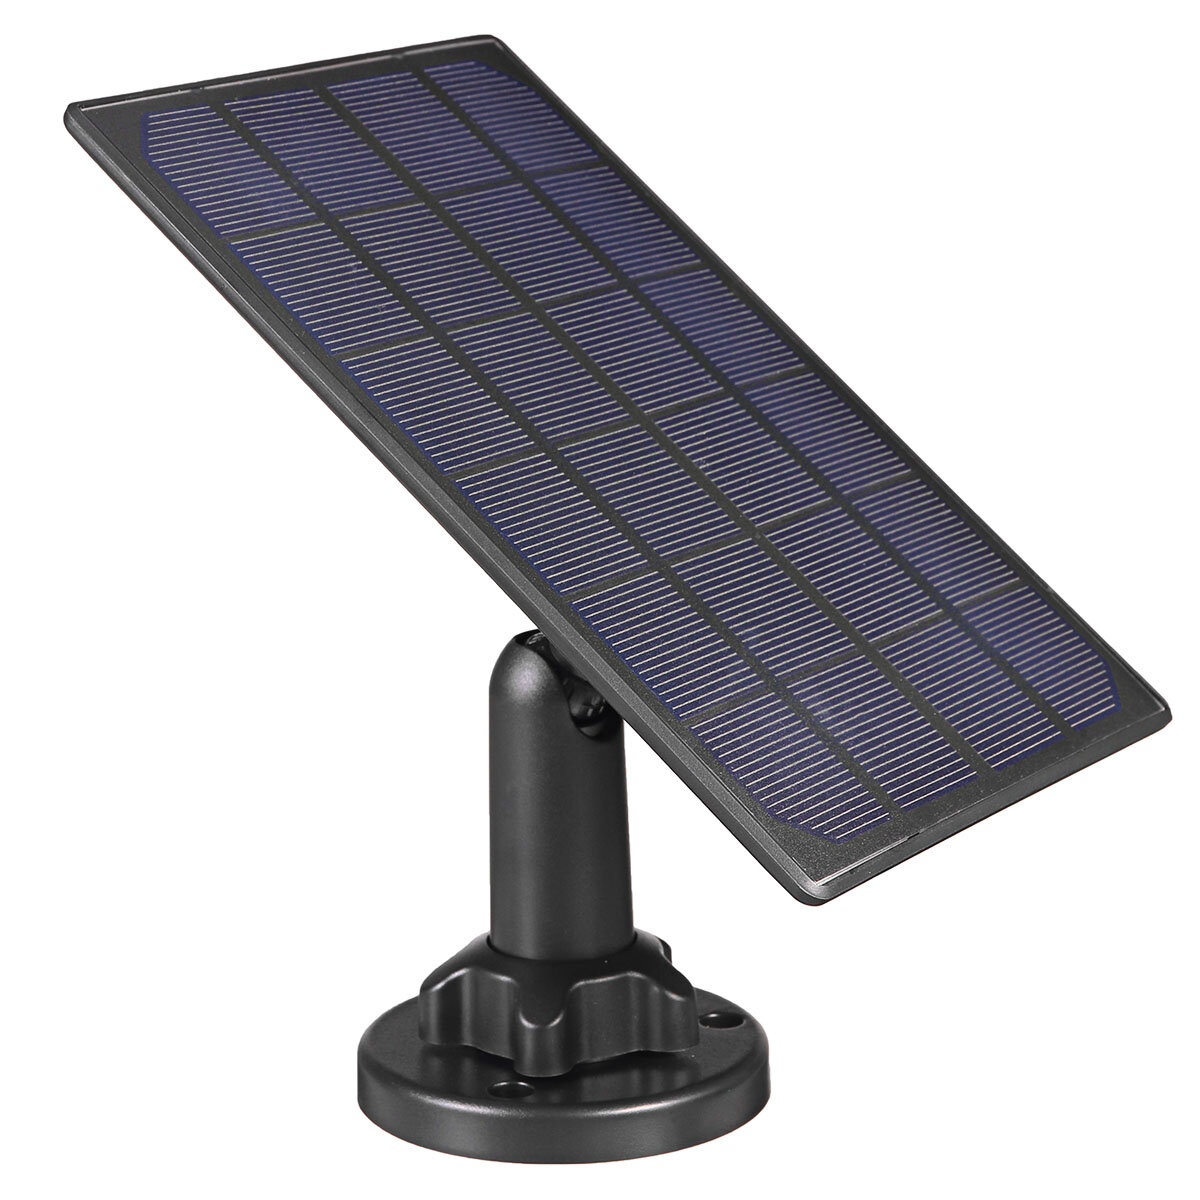 

5V High Efficiency Waterproof Solar Panel For Security Camera With 3m/10Ft Charging Cable for IP CCTV Dome